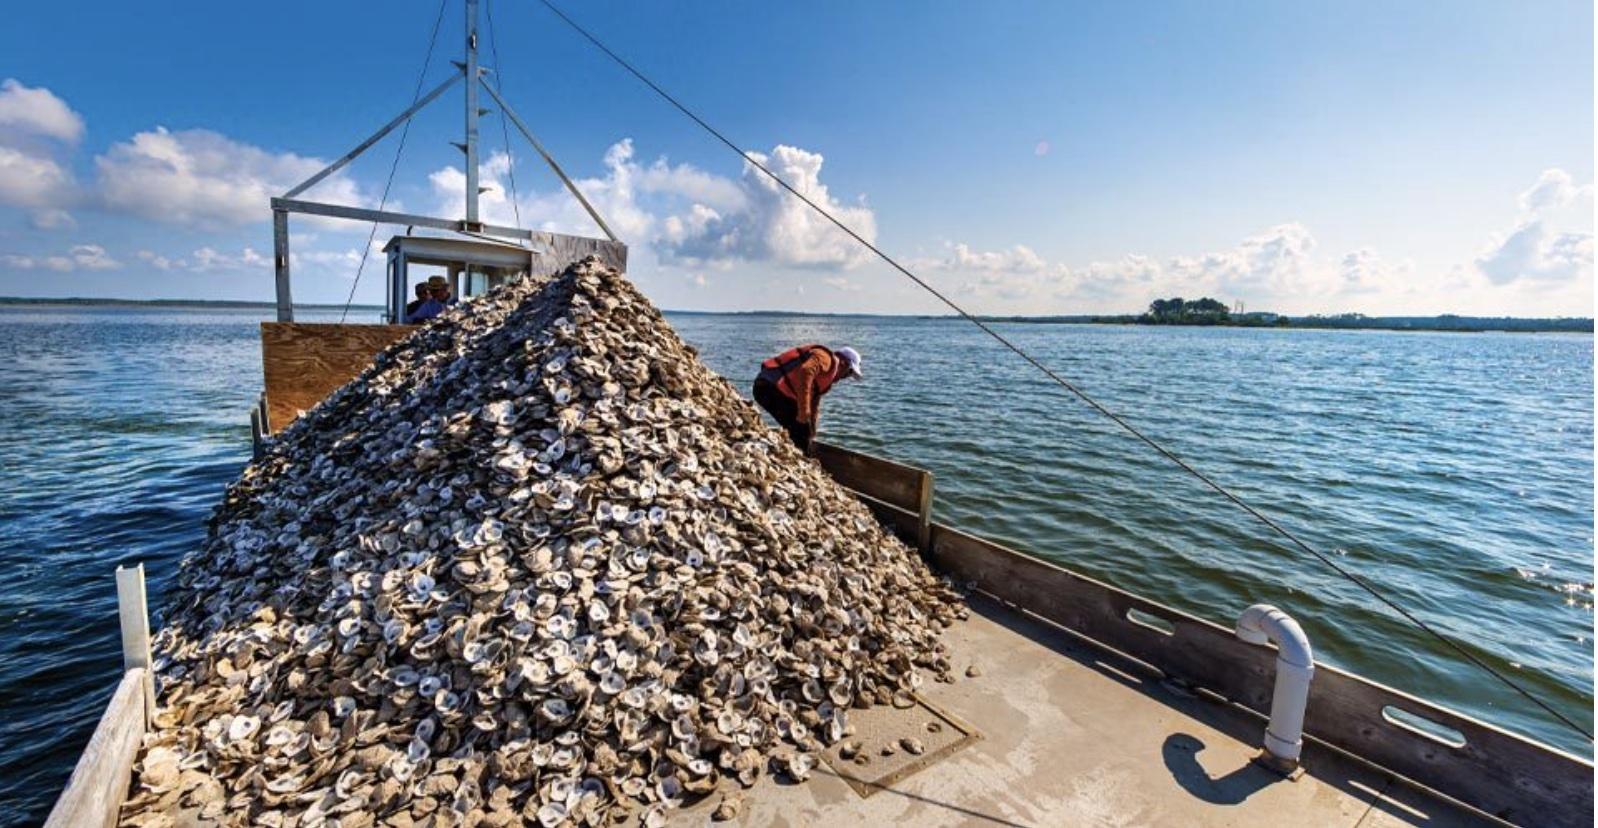 Seafood company owner Casey Todd (steering boat) prepares to dump tens of thousands of oyster shells near Crisfield, Md., to help young oysters thrive on the Chesapeake Bay bottom.